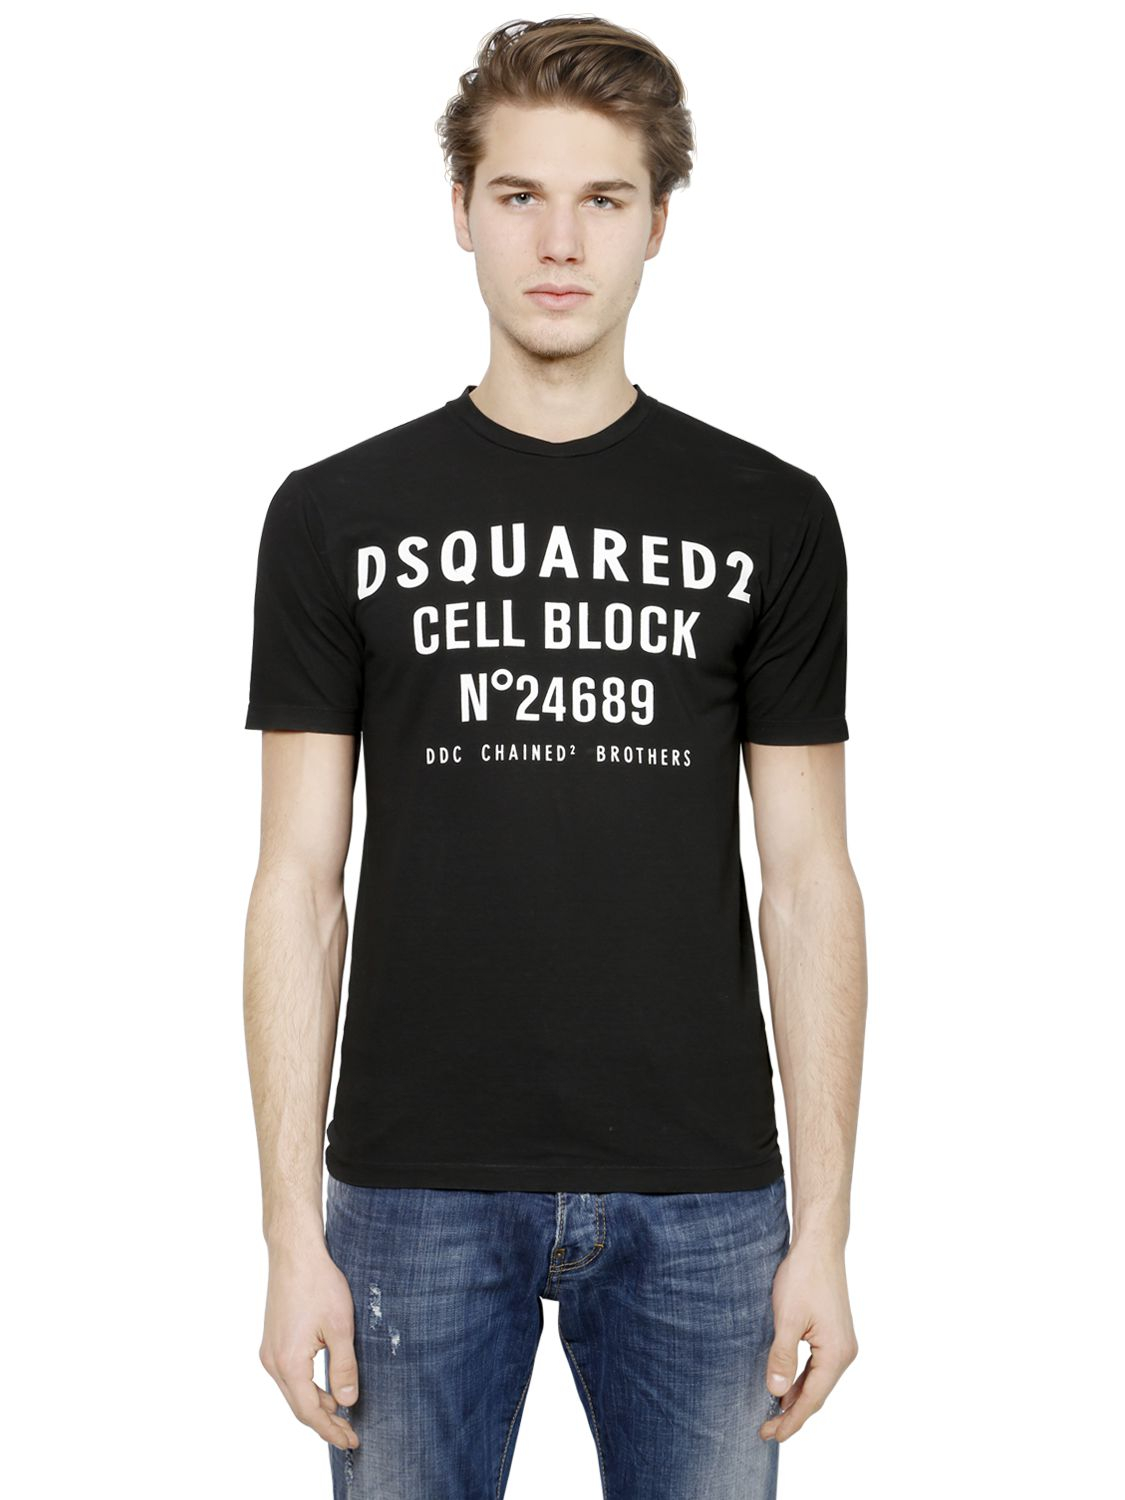 Lyst - Dsquared² Cell Block Printed Cotton T-Shirt in Black for Men